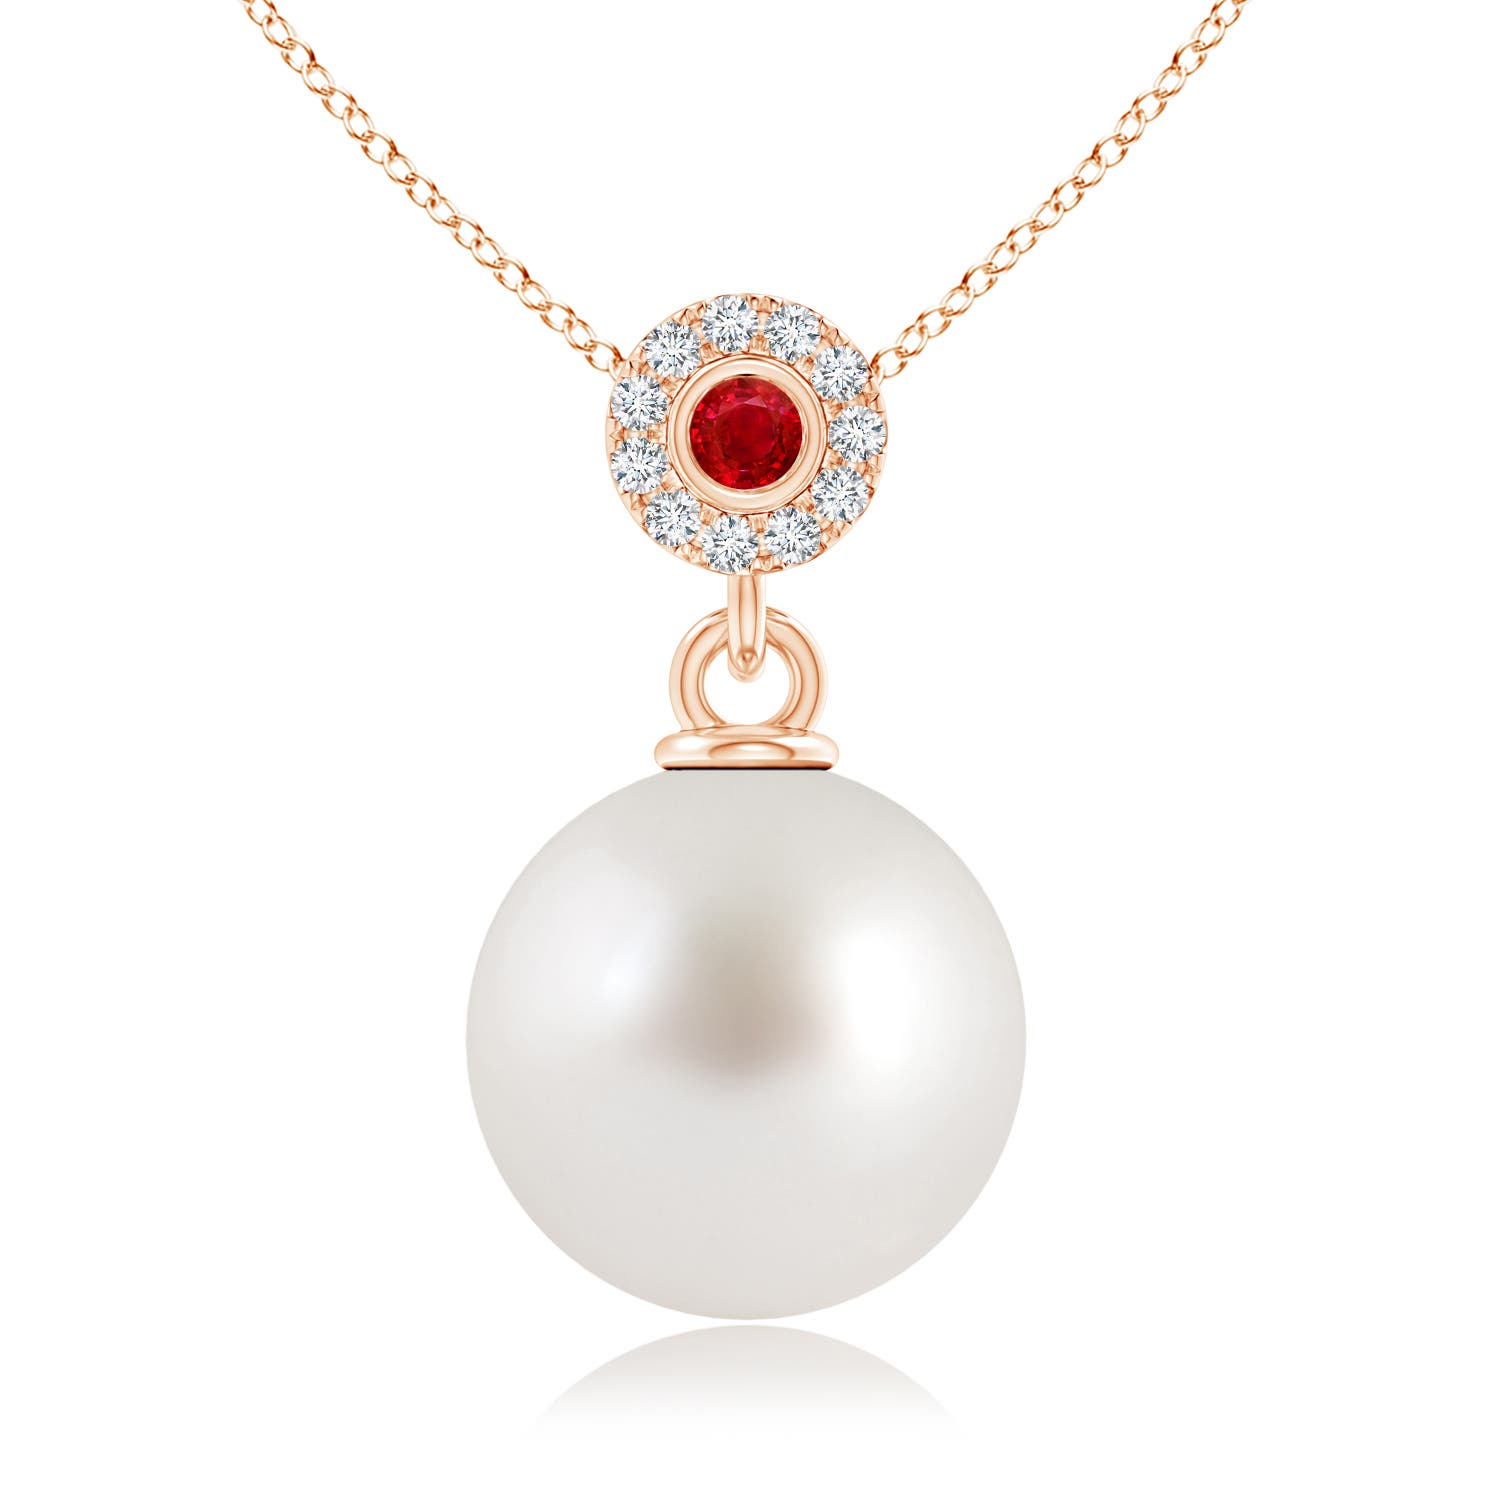 AAA - South Sea Cultured Pearl / 7.31 CT / 14 KT Rose Gold